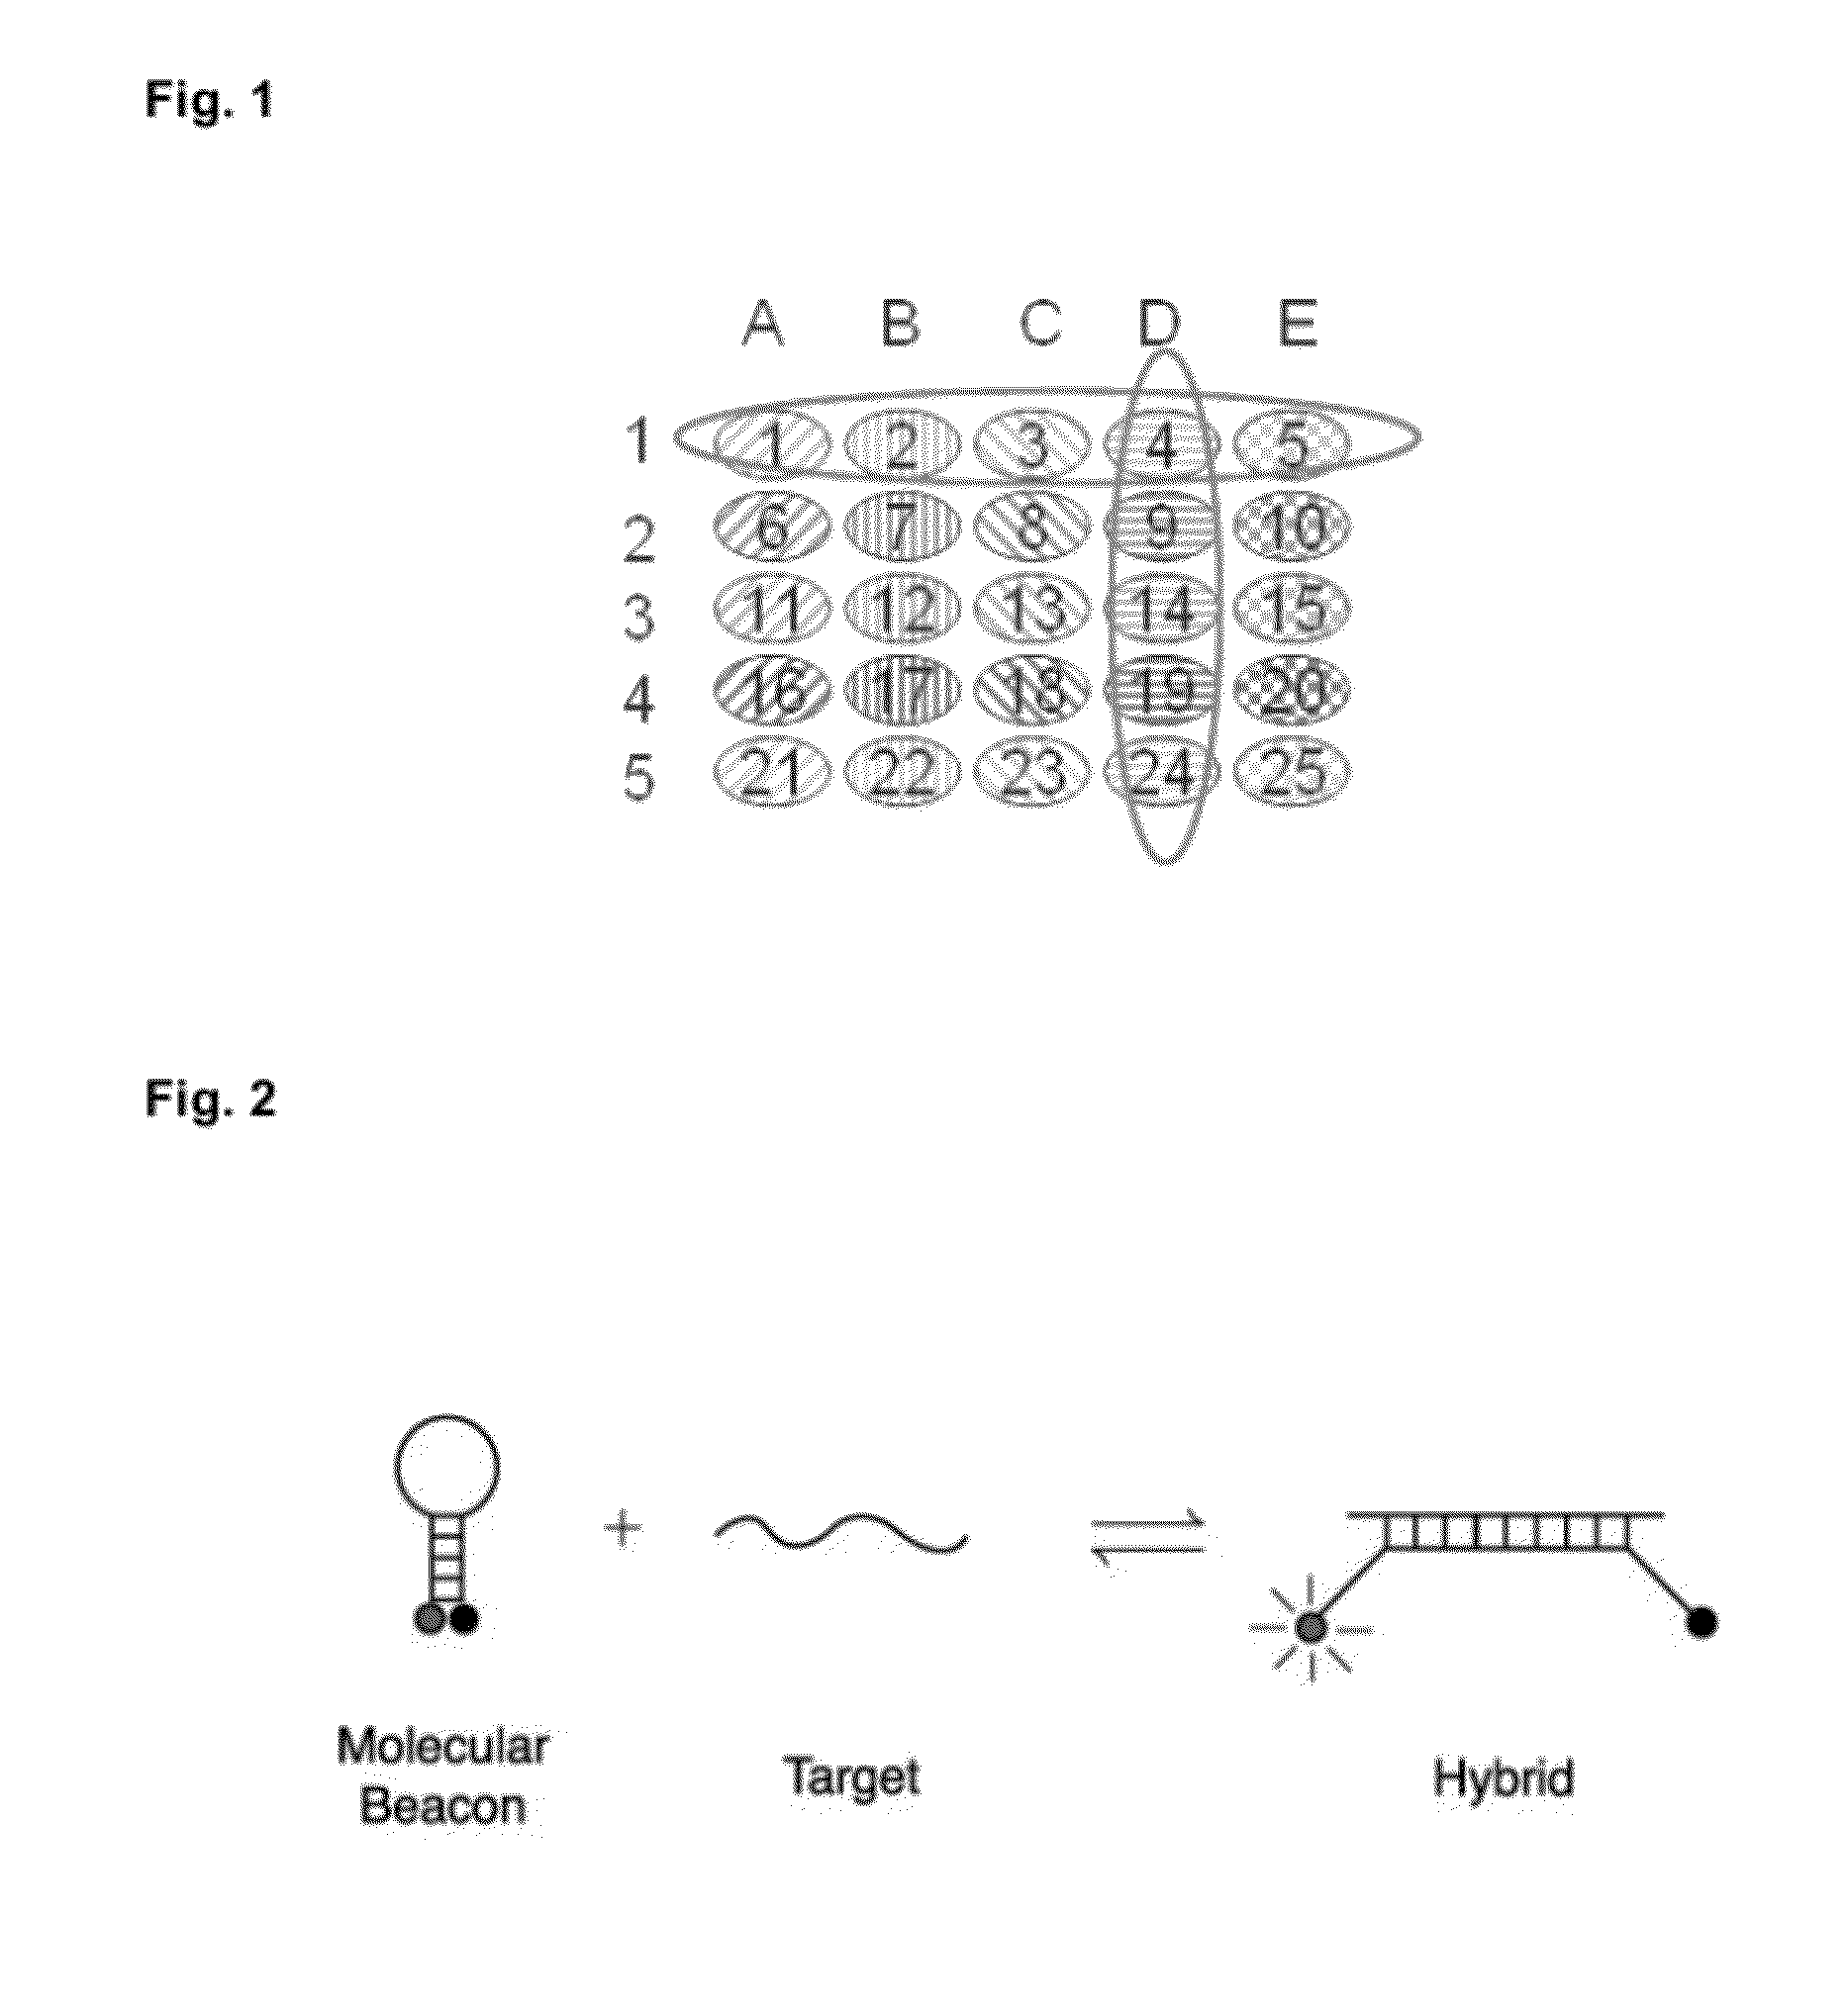 Detection of multiple nucleic acid sequences in a reaction cartridge